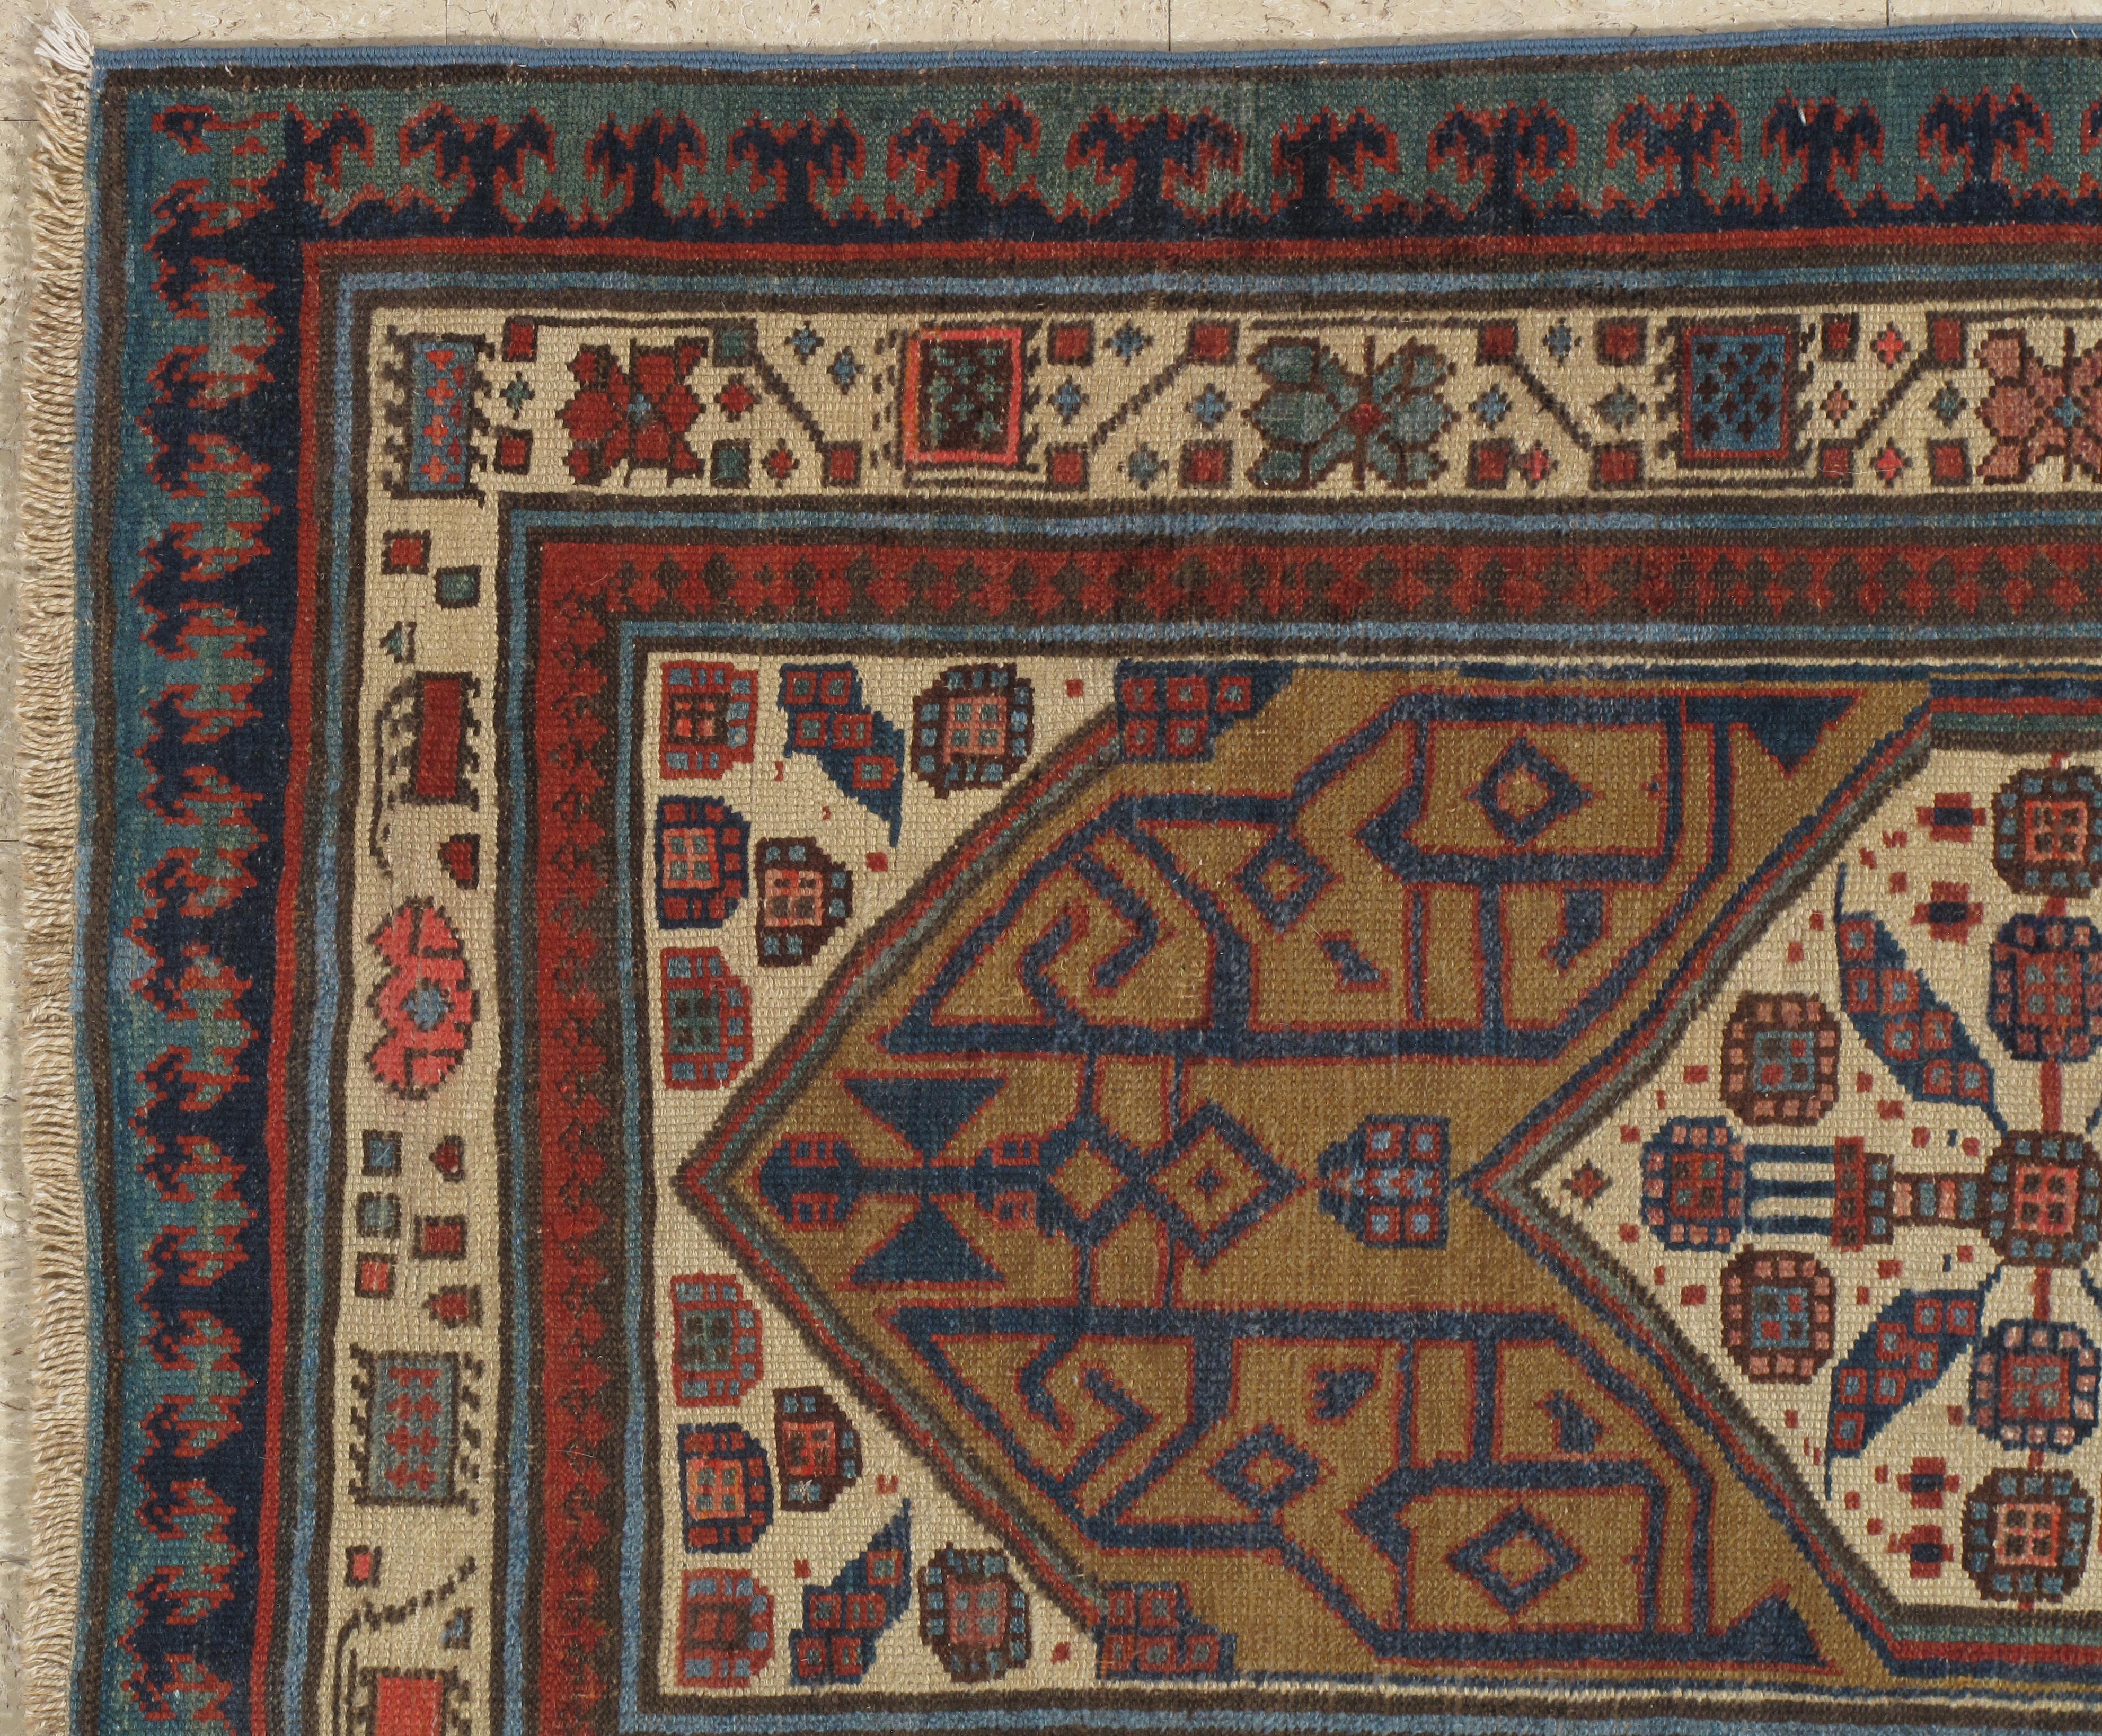 The village of Serab is known for their fine long runners with a characteristic camel ground and lozenge shaped medallions. These rugs are woven in the village of Serab, located in the North West Region of Persia.
Size: 3' x 14'3